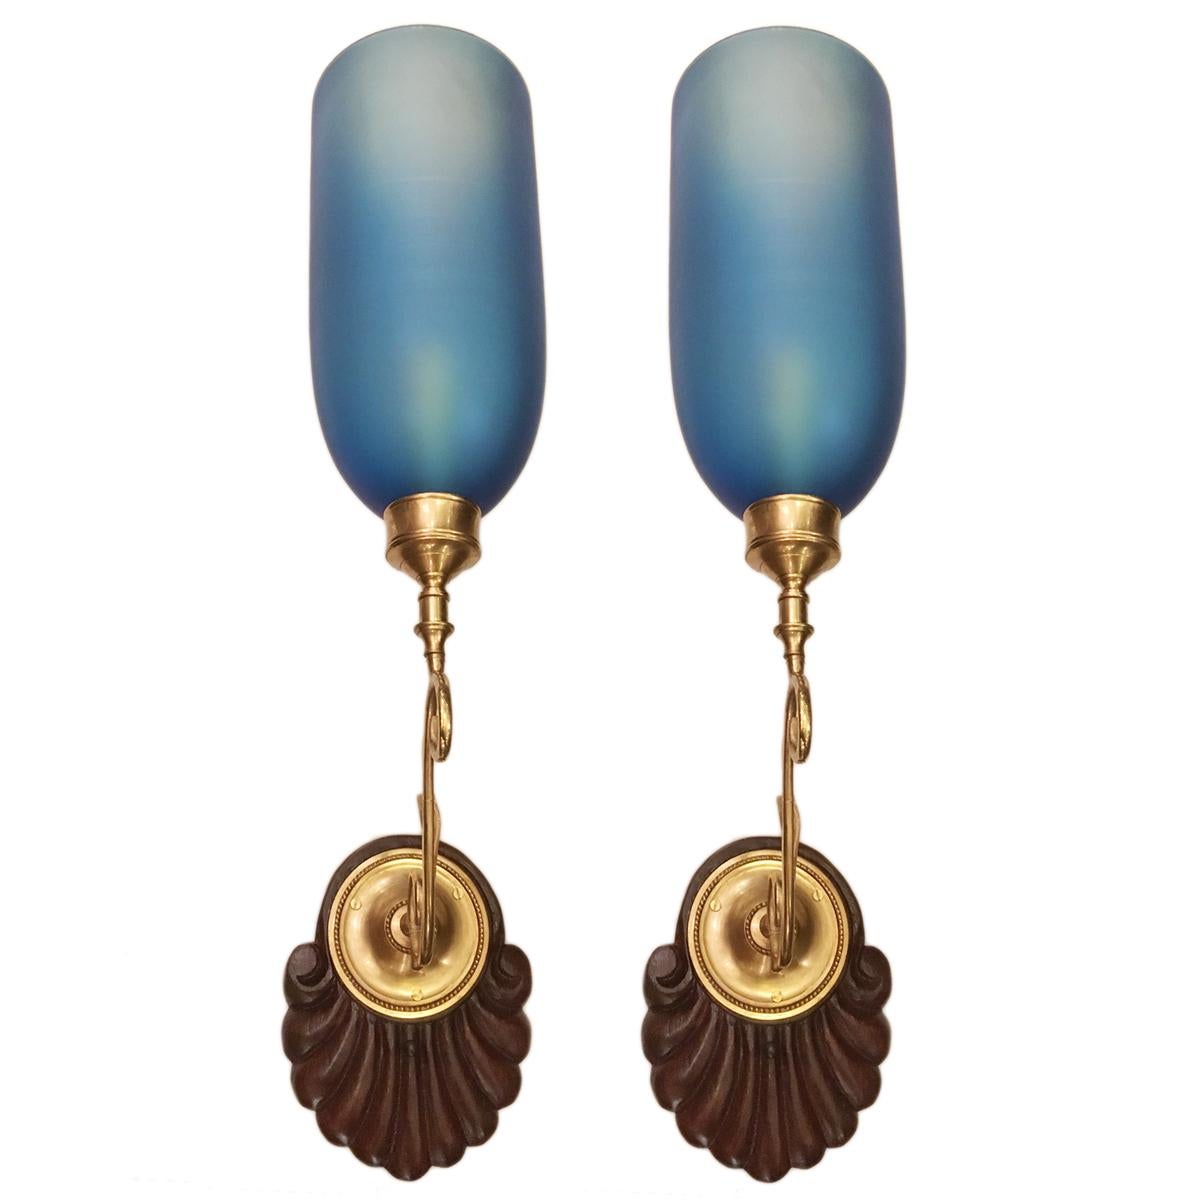 A set of English circa 1950s Anglo-Indian style single-light sconces with carved wood backplates and frosted blue glass hurricanes. Sold per pair.

Measurements:
Height 24?
Width 5.5?
Depth 11.5?.